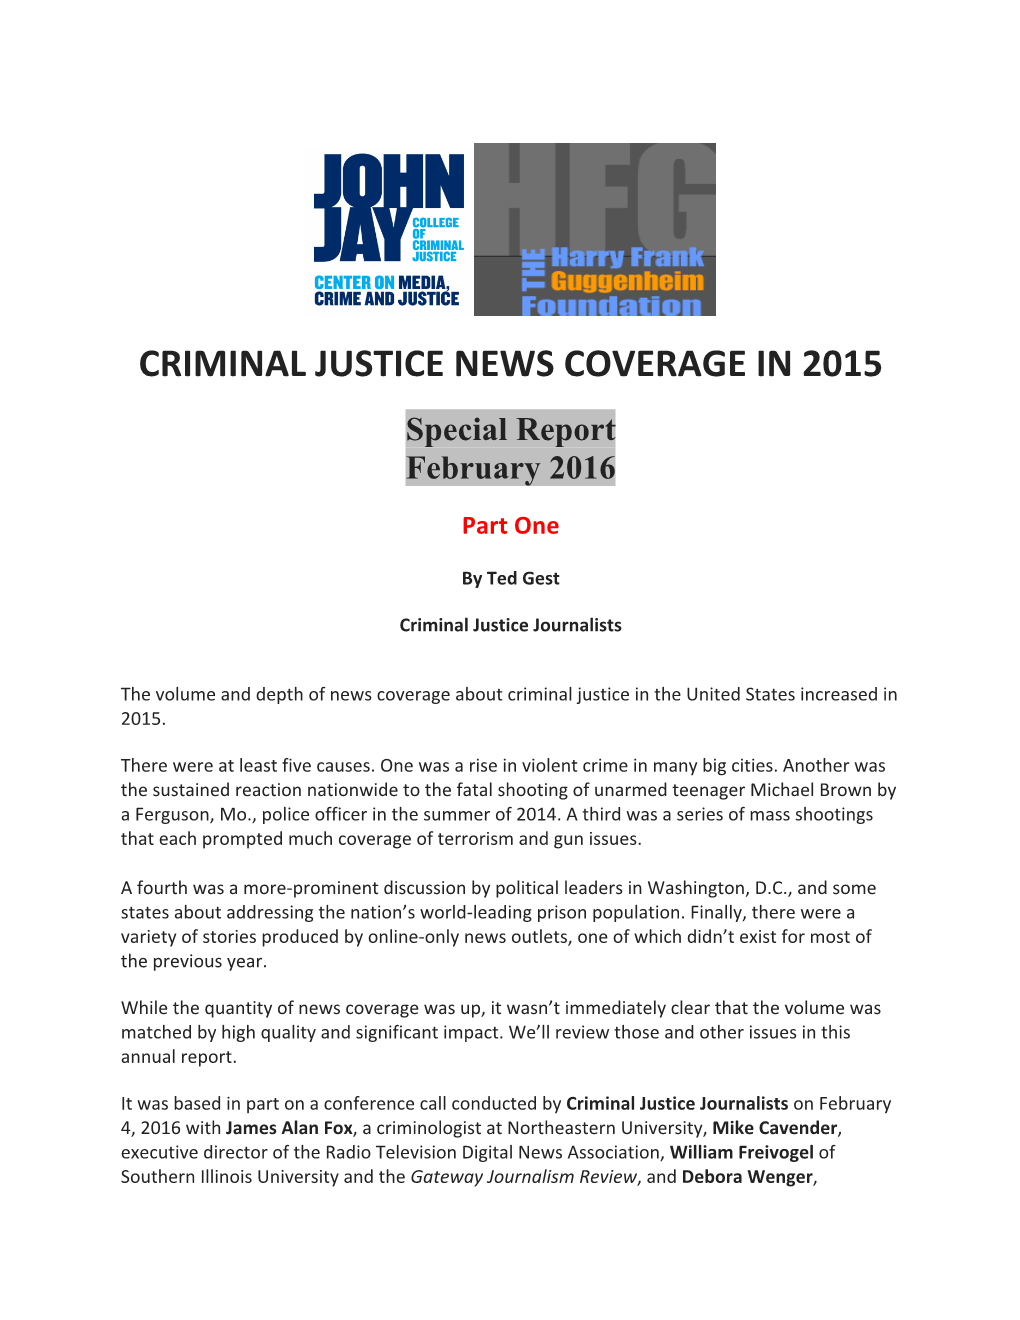 Criminal Justice News Coverage in 2015